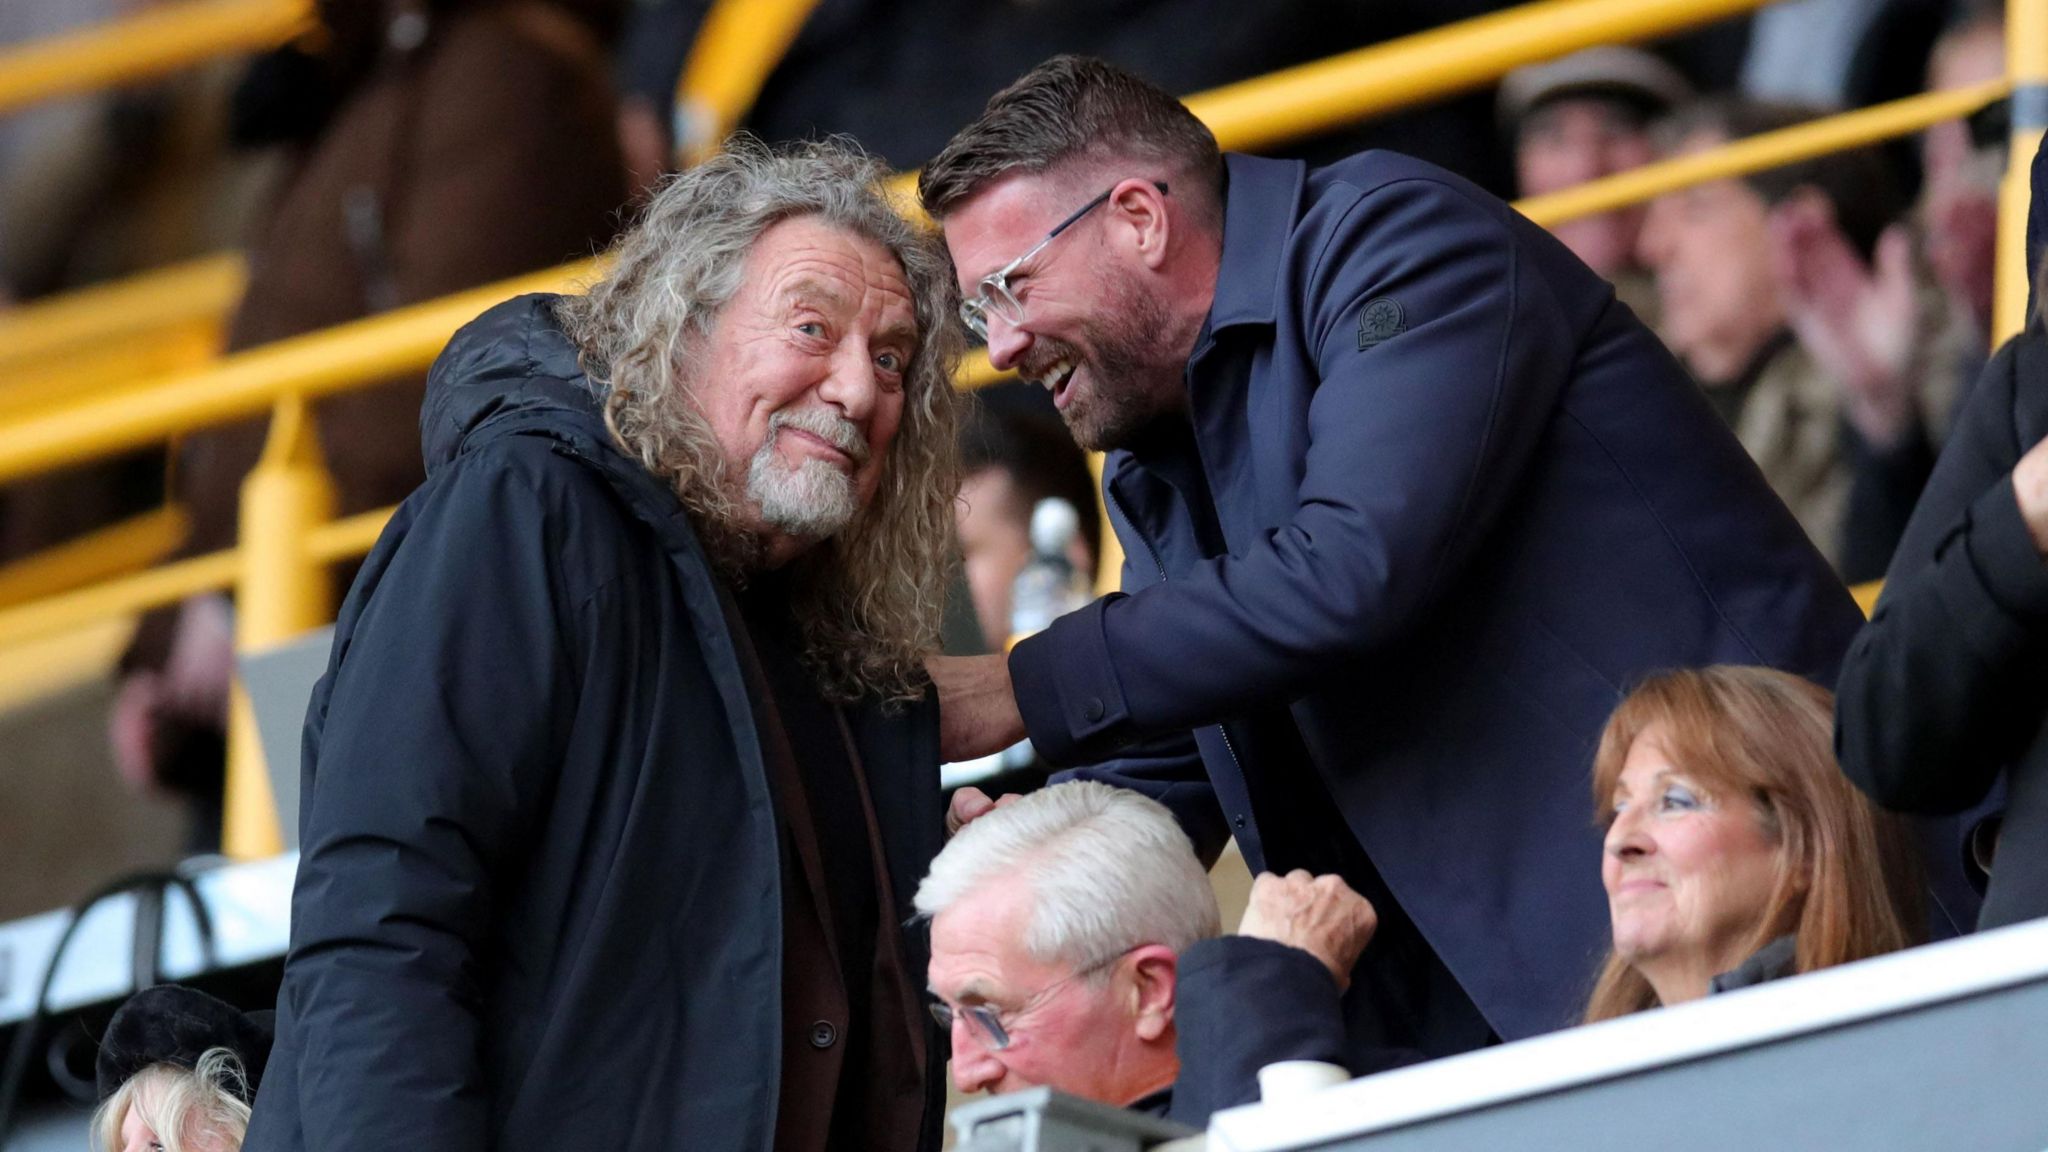 Robert Plant at a match in Wolverhampton